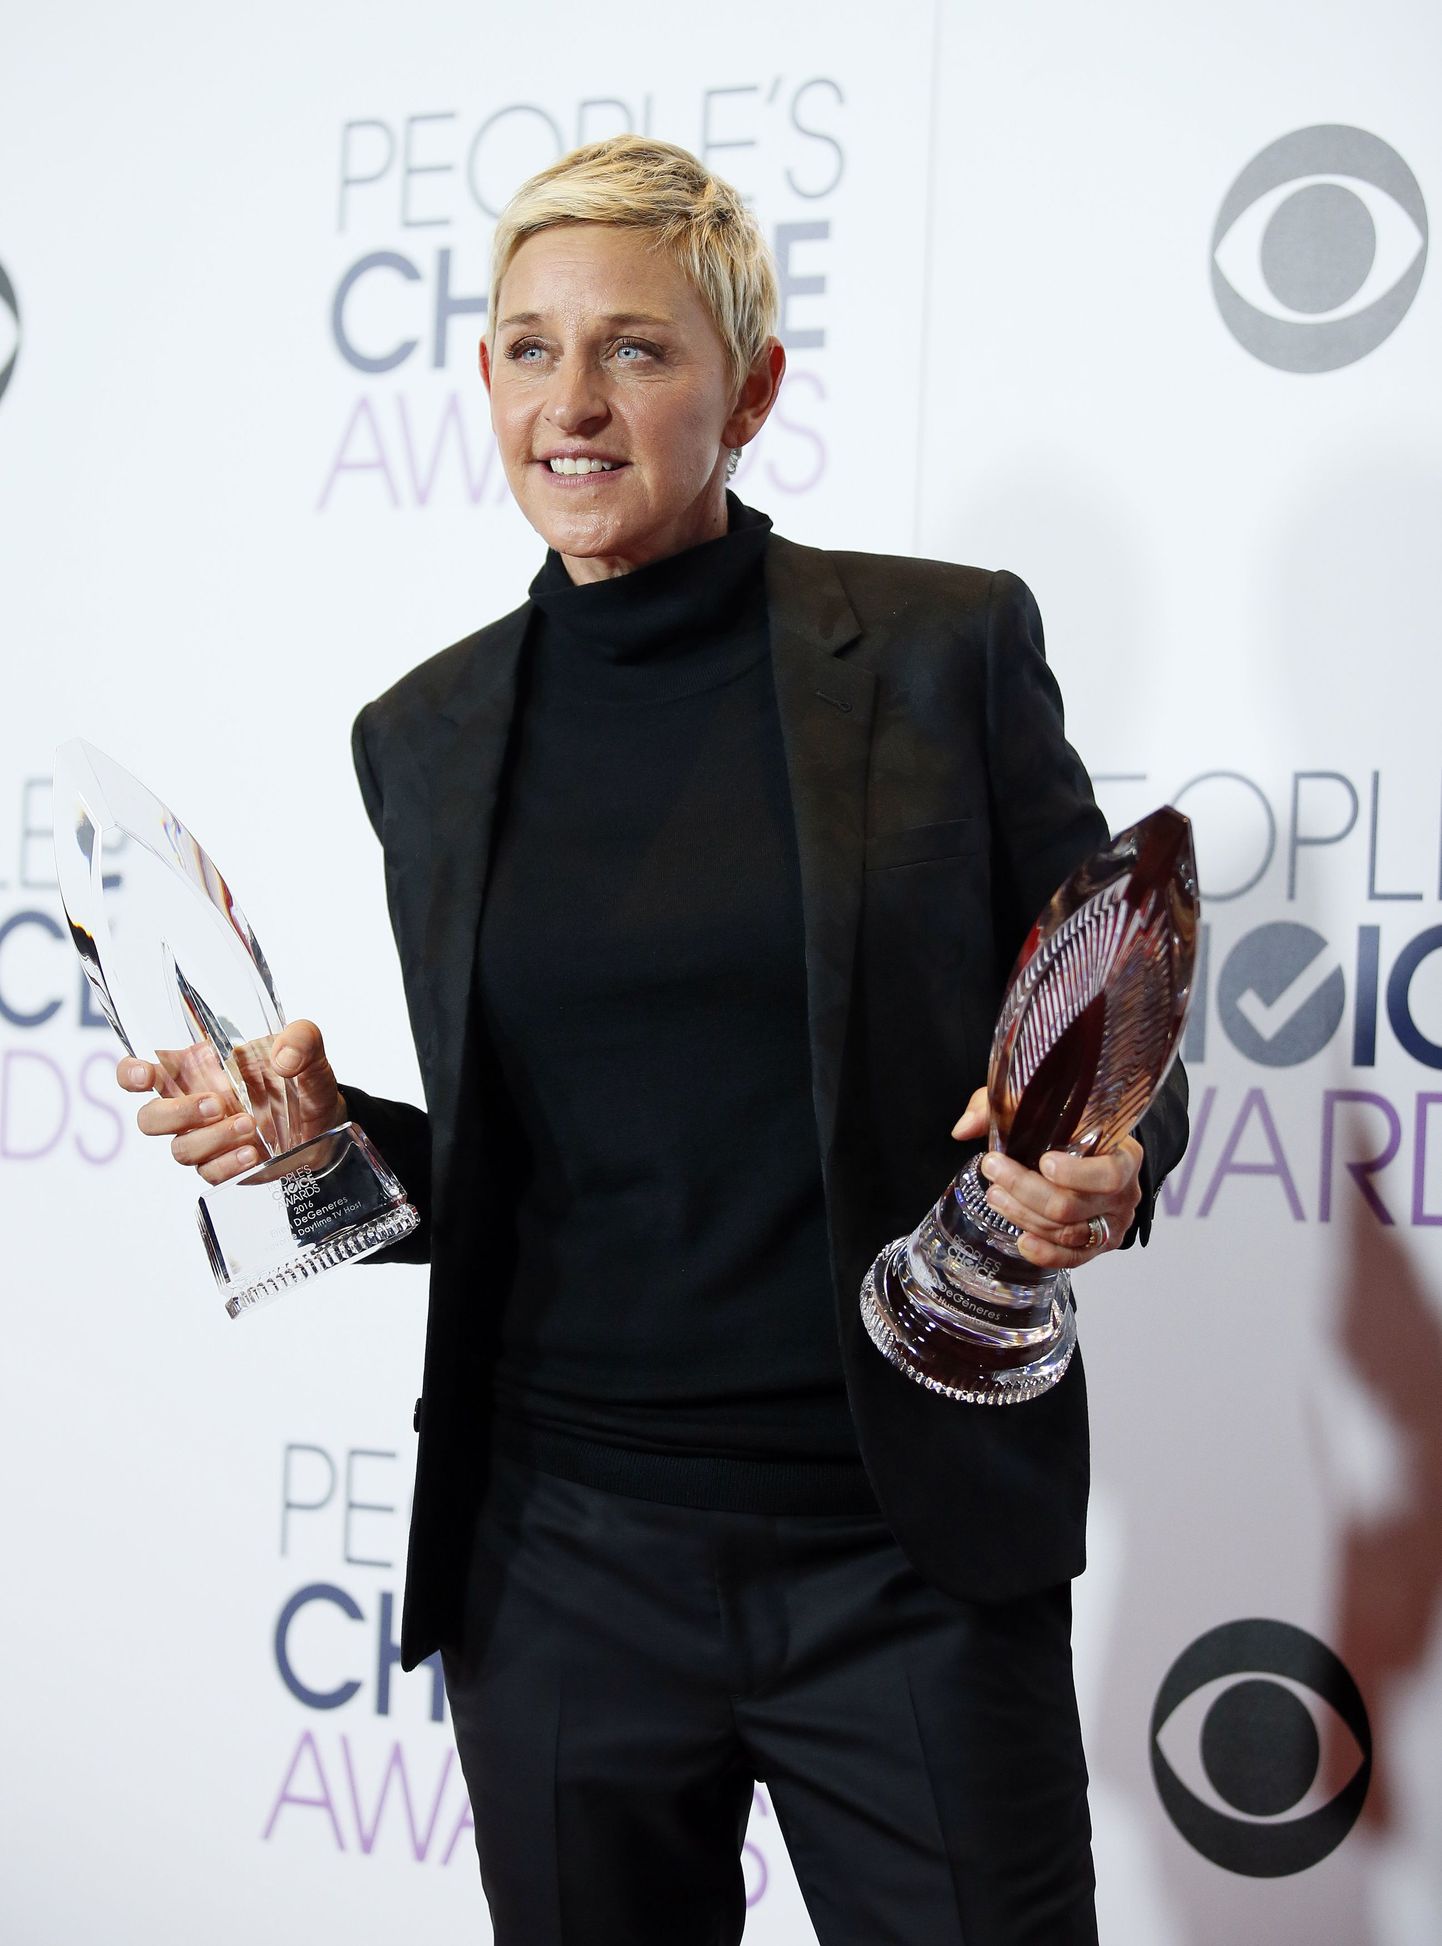 Ellen DeGeneres poses backstage with her Humanitarian Award and Award for Favorite Daytime TV Host during the People's Choice Awards 2016 in Los Angeles, California January 6, 2016.  REUTERS/Danny Moloshok